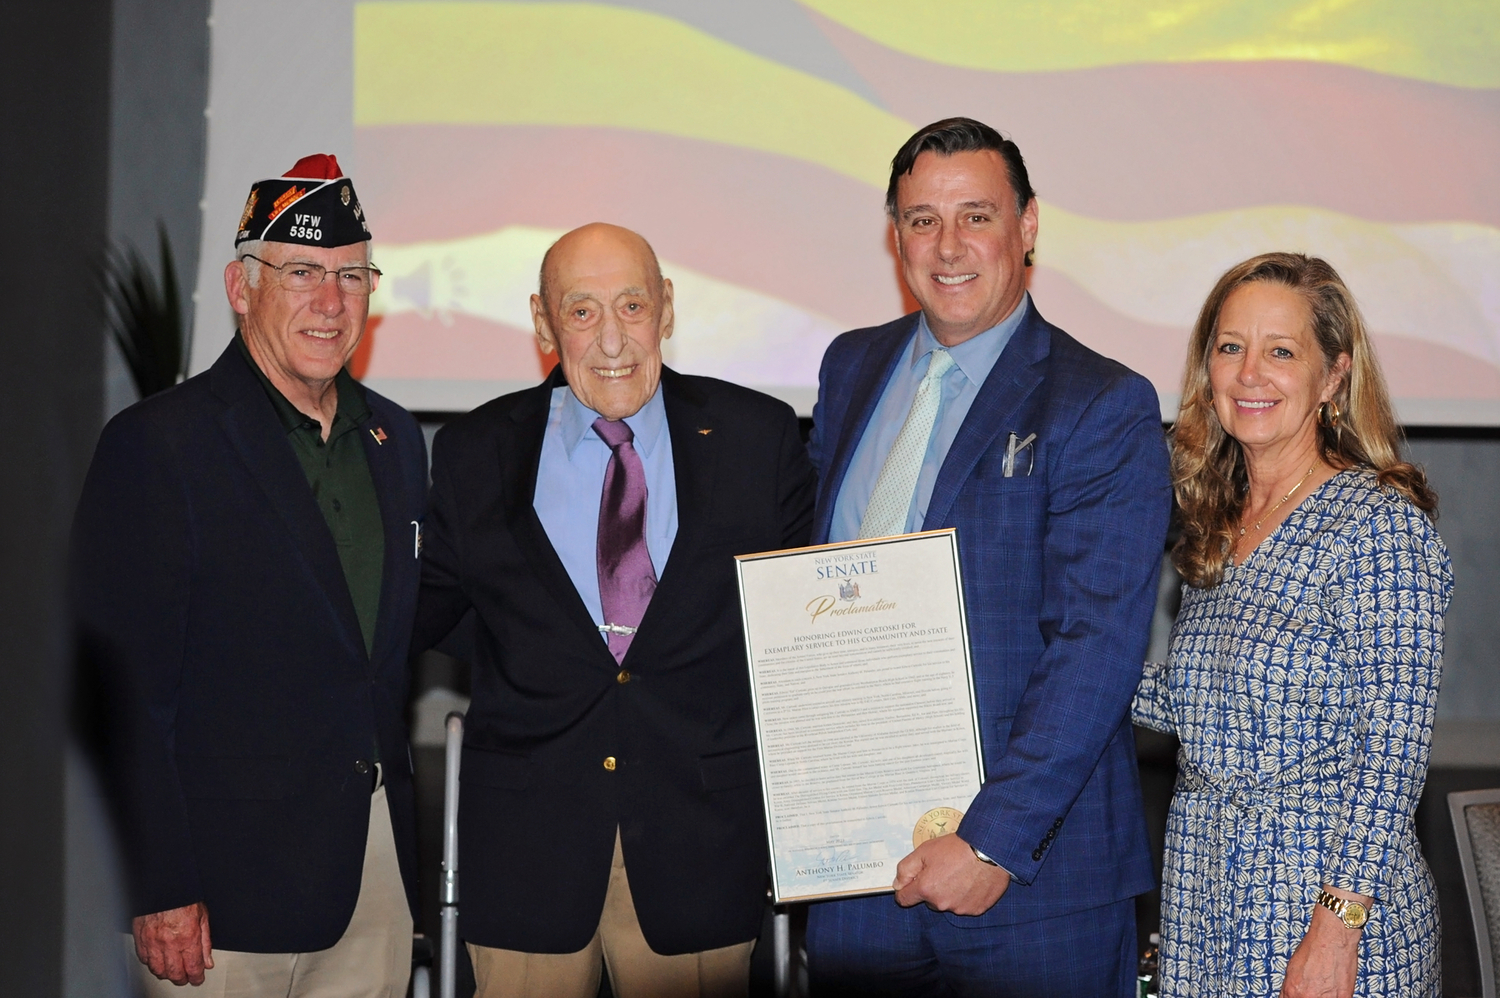 Commander William M. Hughes Jr., from the All American Post 5350, Colonel Edwin Cartoski, New York State Senator Anthony Palumbo and Southampton Town Clerk Sundy Schermeyer at the Veterans Award Ceremony at Peconic Landing.